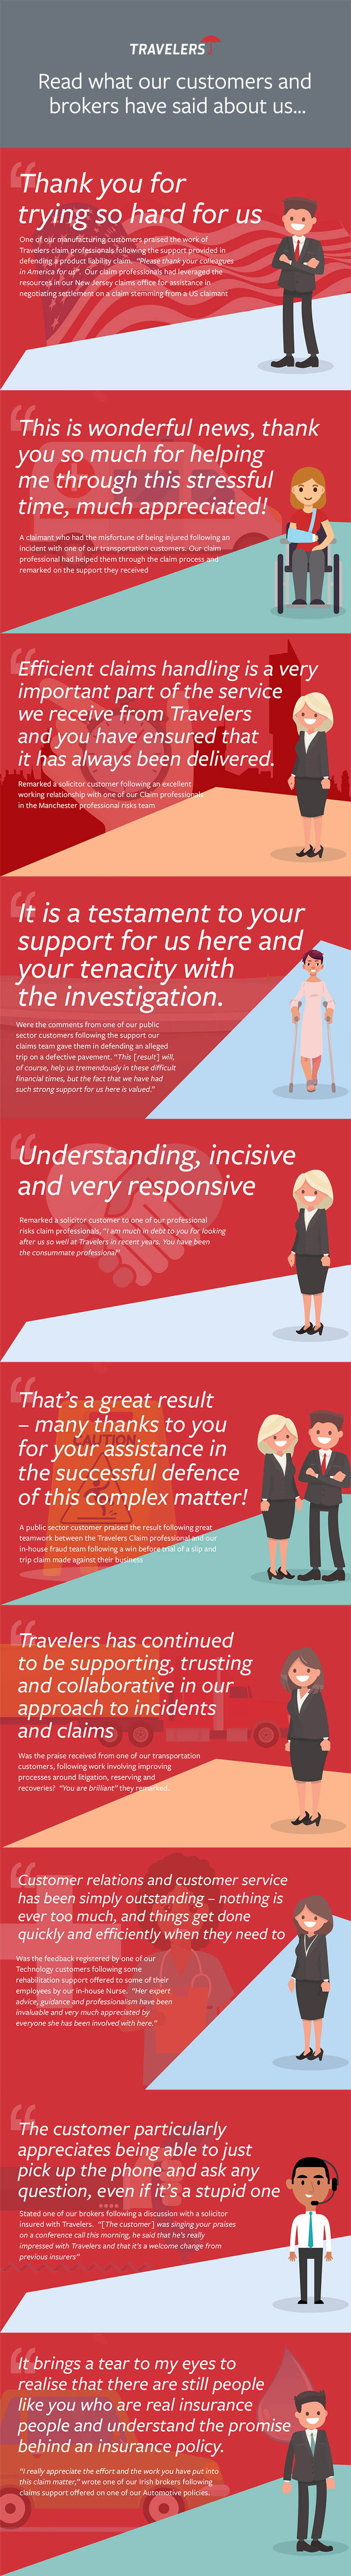 Claims feedback infographic